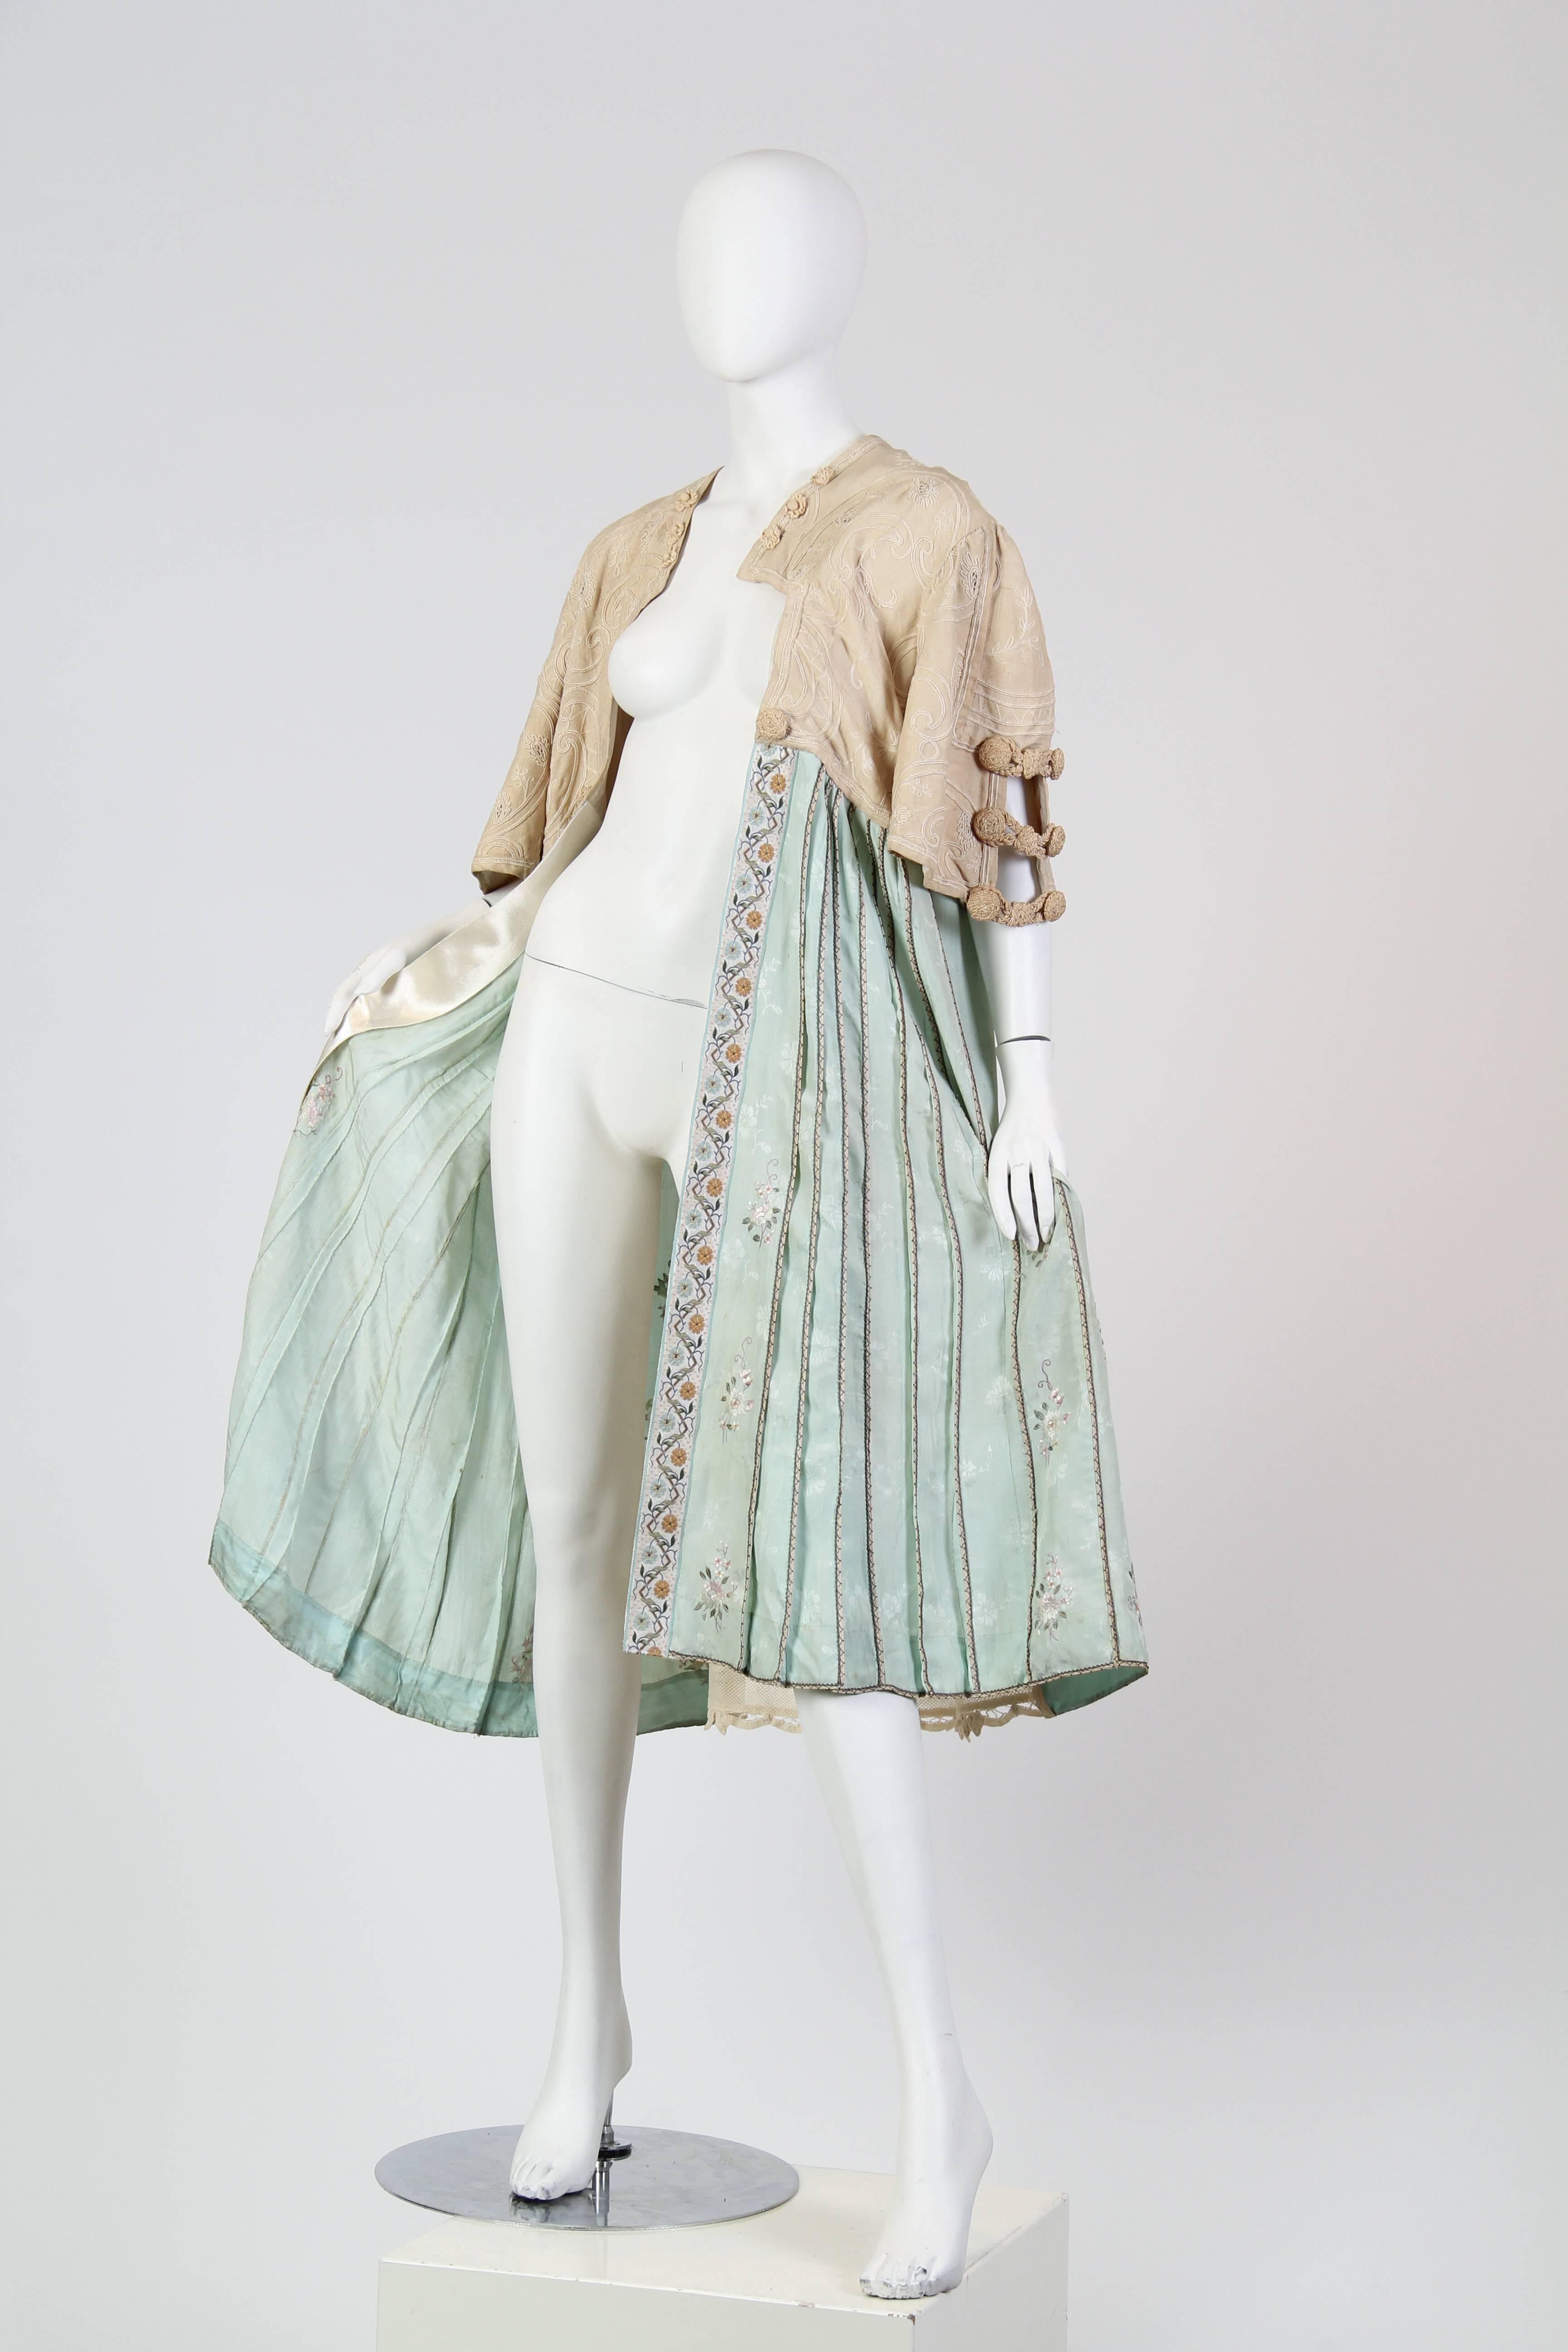 This is a gorgeous jacket, possibly dating from the early twentieth century and altered later. The top part, cut like a bolero, is made of a tan knit and covered all over in delicate corded lines in the shapes of flowers and abstract geometric